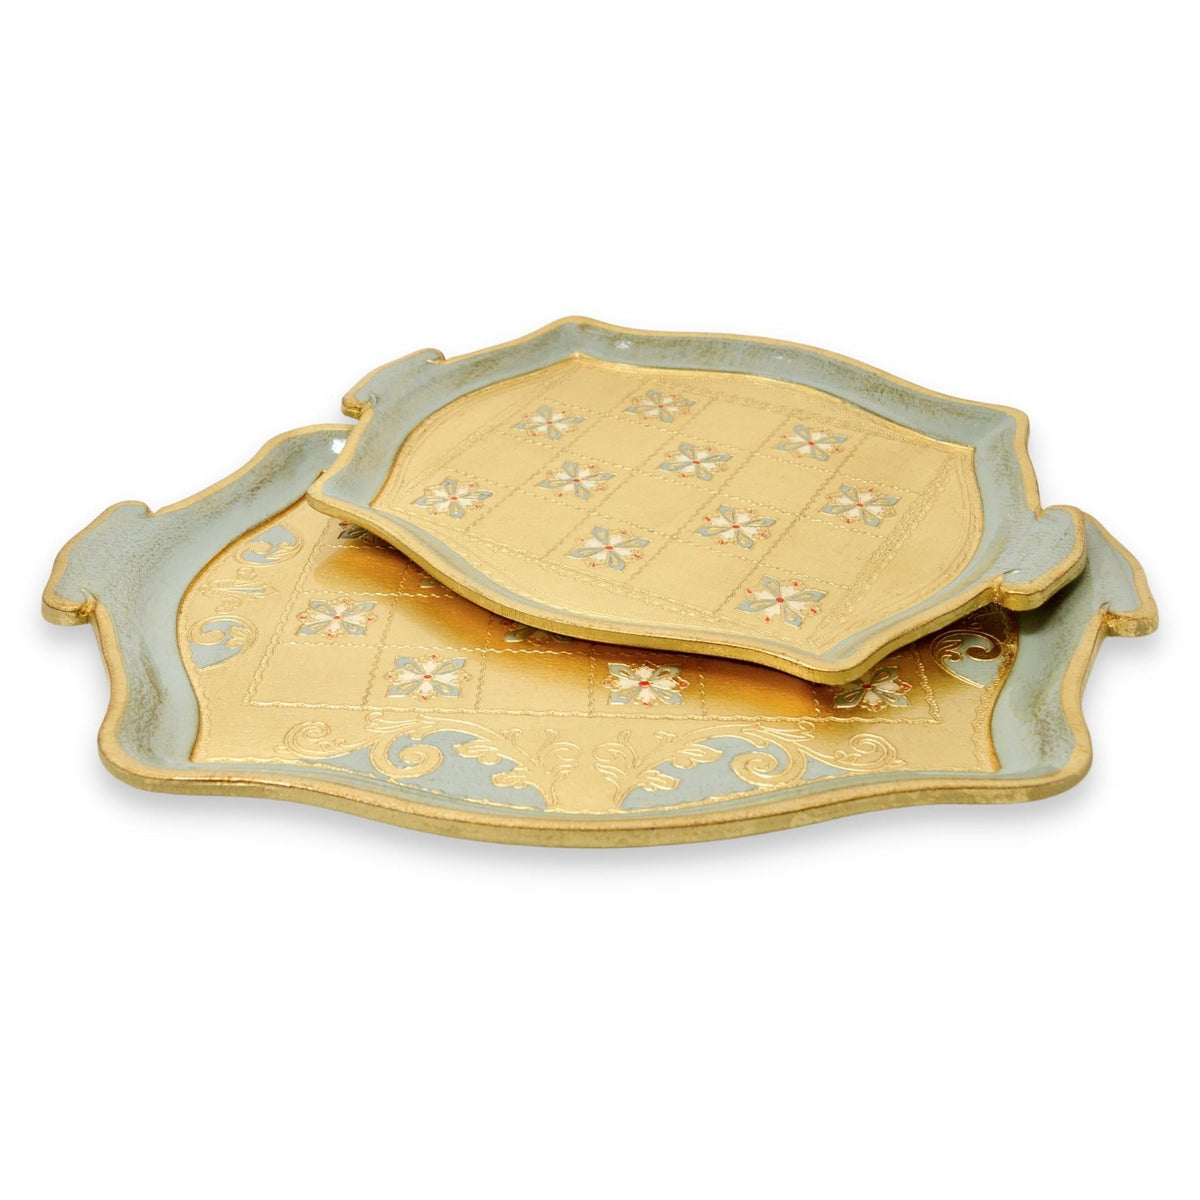 Florentine Carved Gilded Wood, Elegant Tray, Set of 2, Made in Italy - My Italian Decor